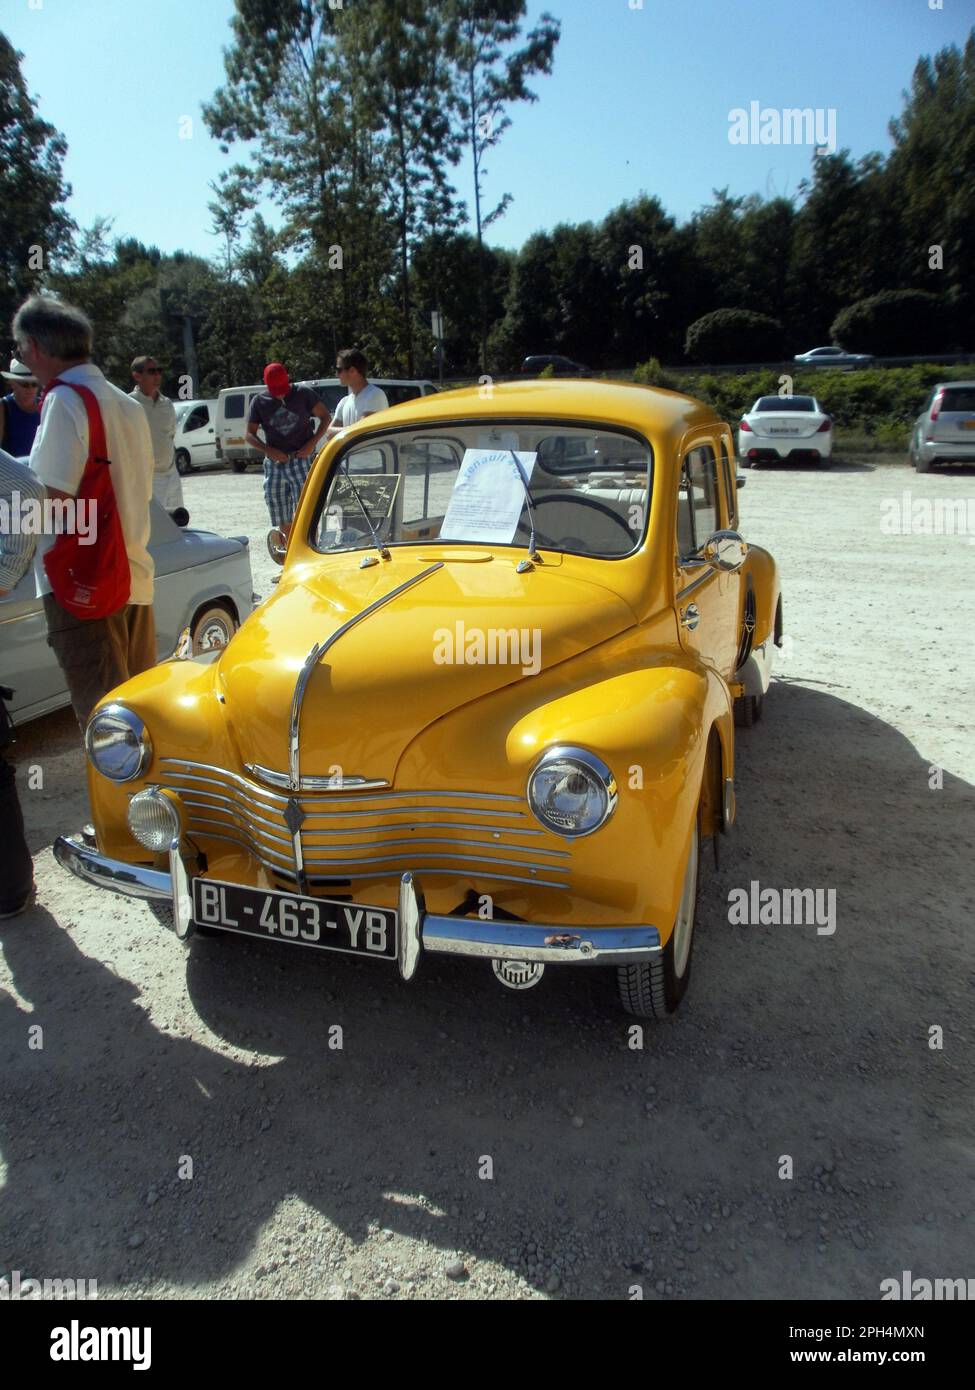 Le Bourget du lac, France - August 19th 2012 : Public exhibition of classic cars. Focus on a yellow Renault 4CV grand luxe. Stock Photo